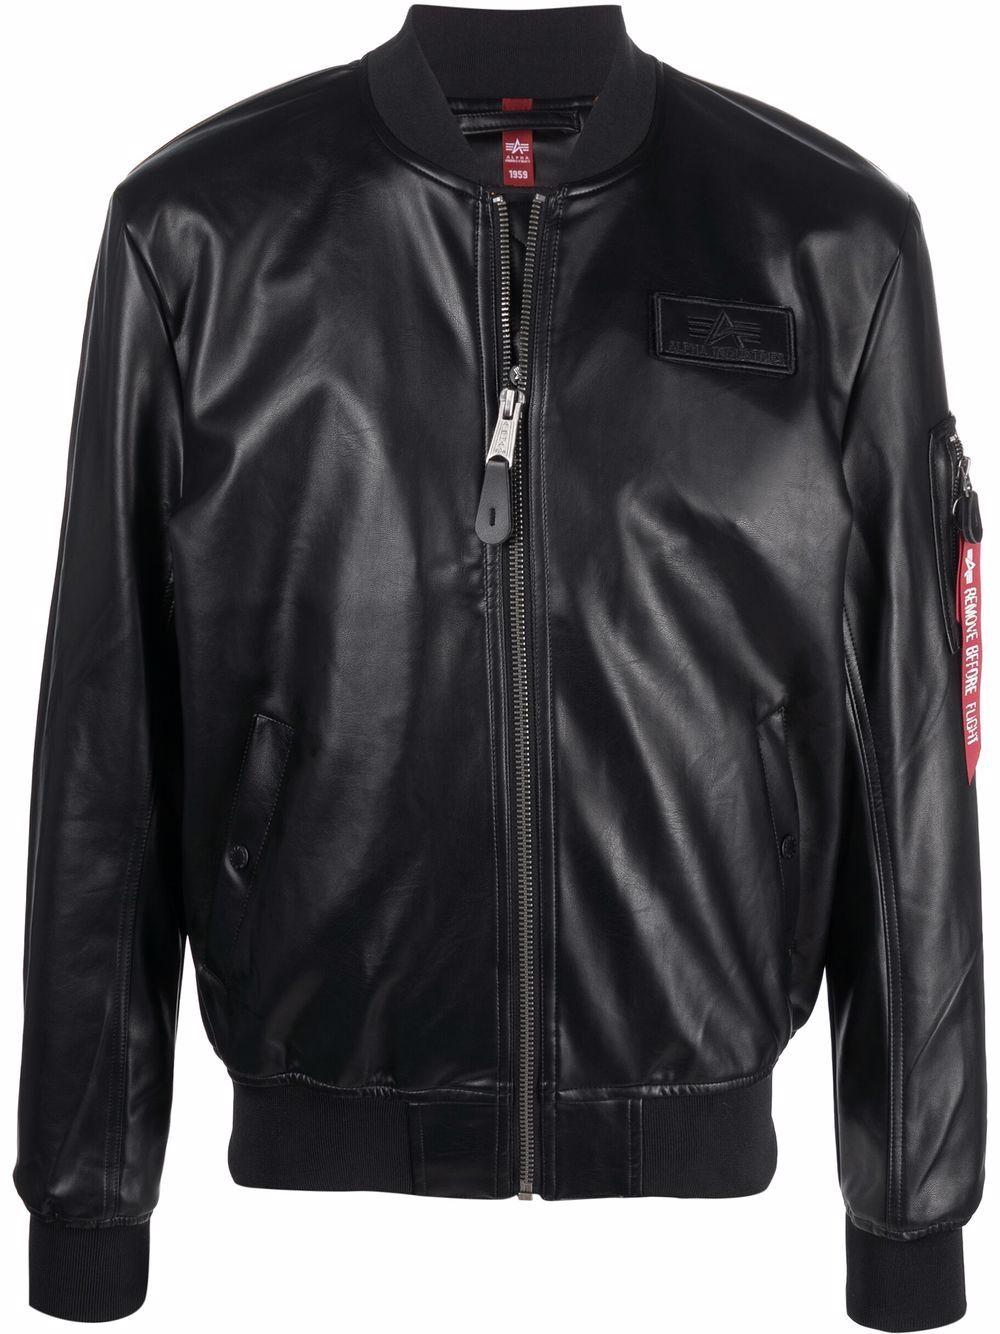 Alpha Industries Ma-1 Vf Jacket Black In Leather for Men - Save 40 